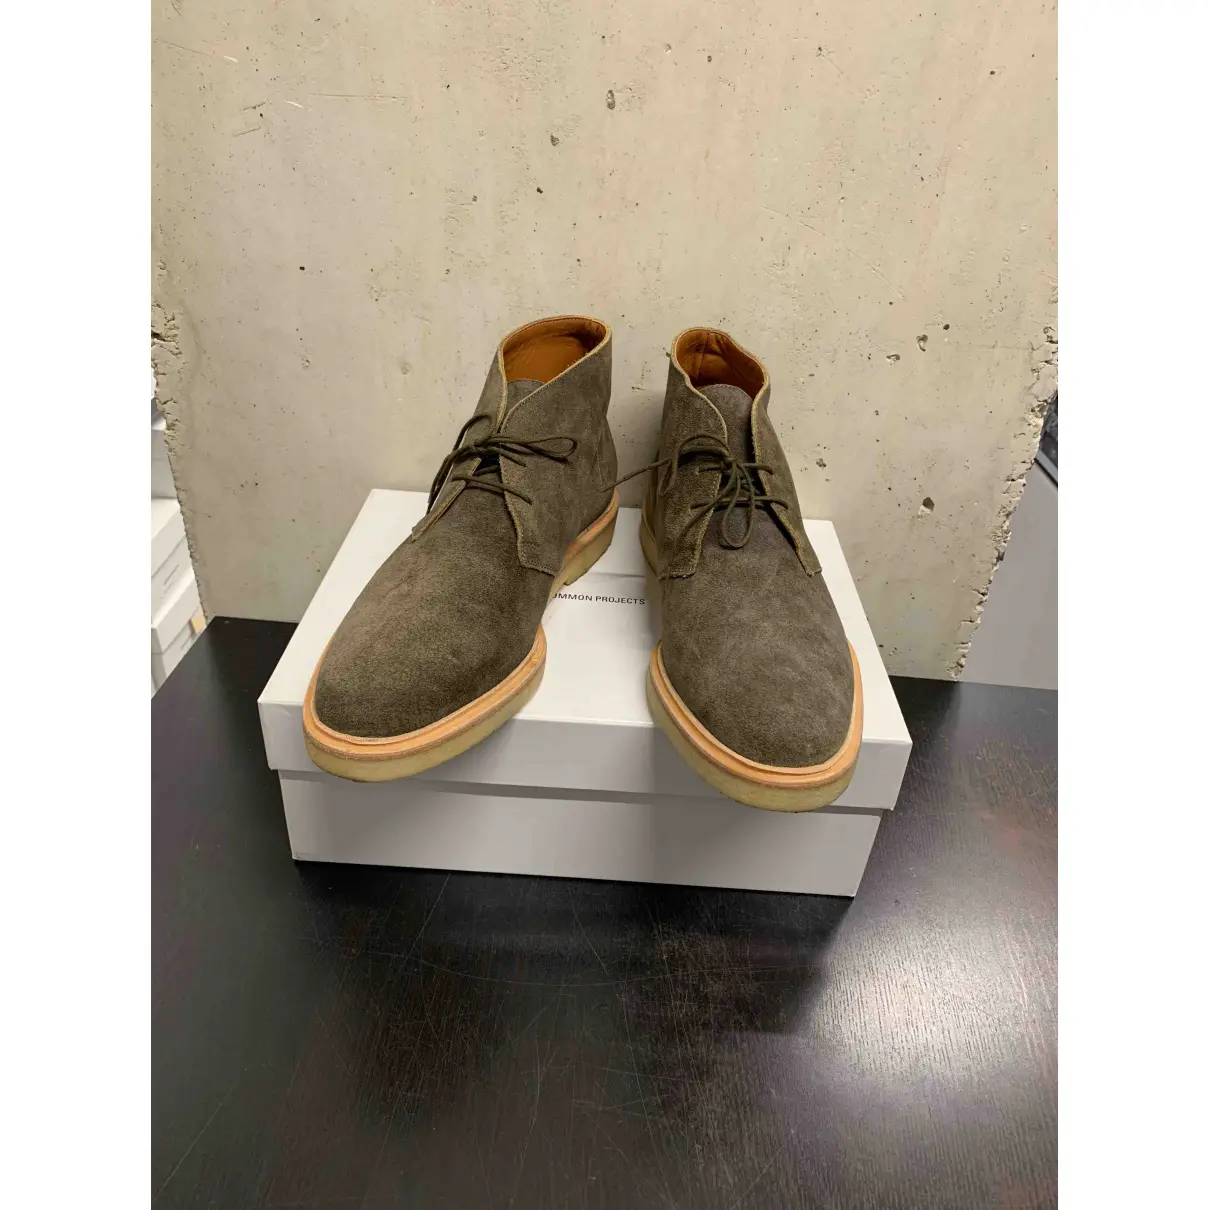 Buy Common Projects Boots online